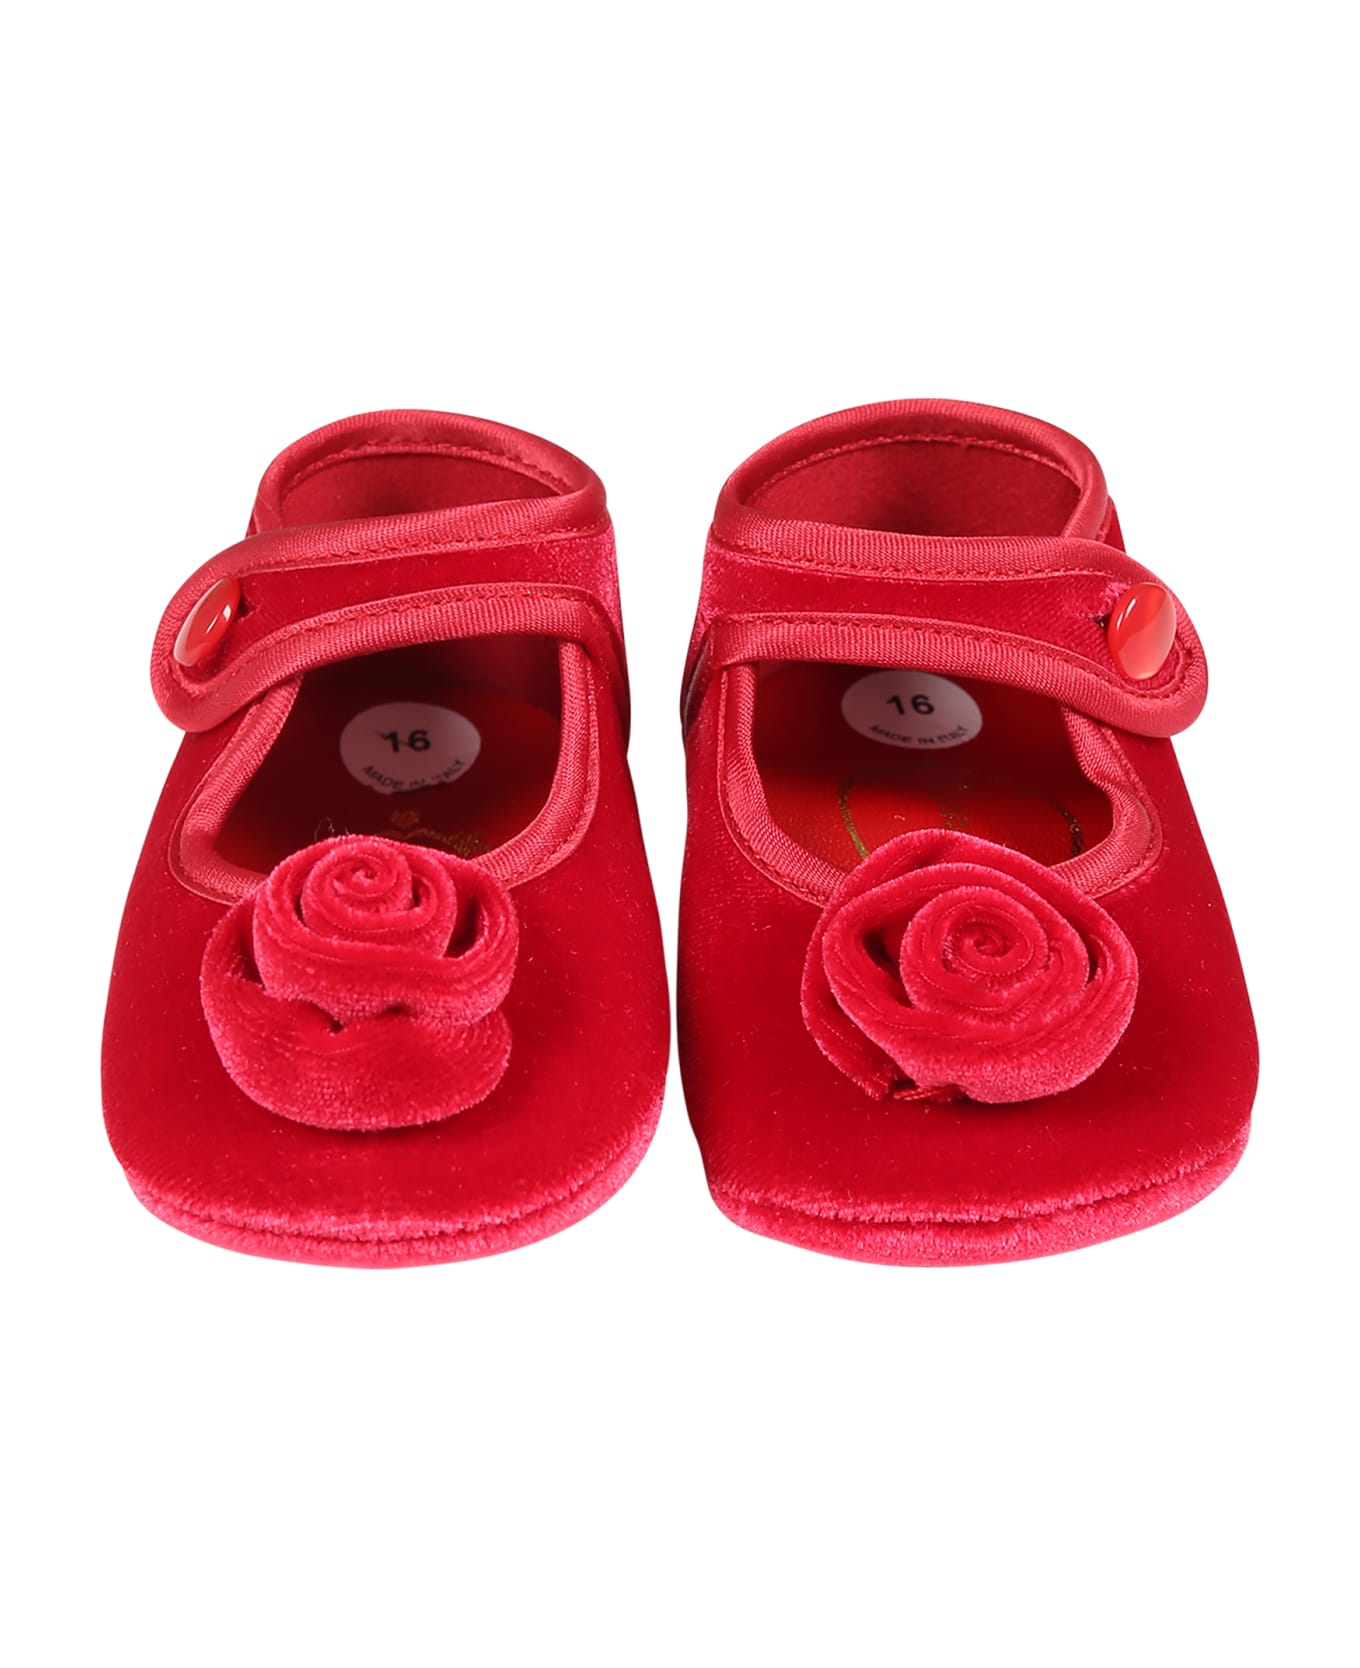 Monnalisa Red Ballets Flats For Baby Girl With Rose - Red シューズ